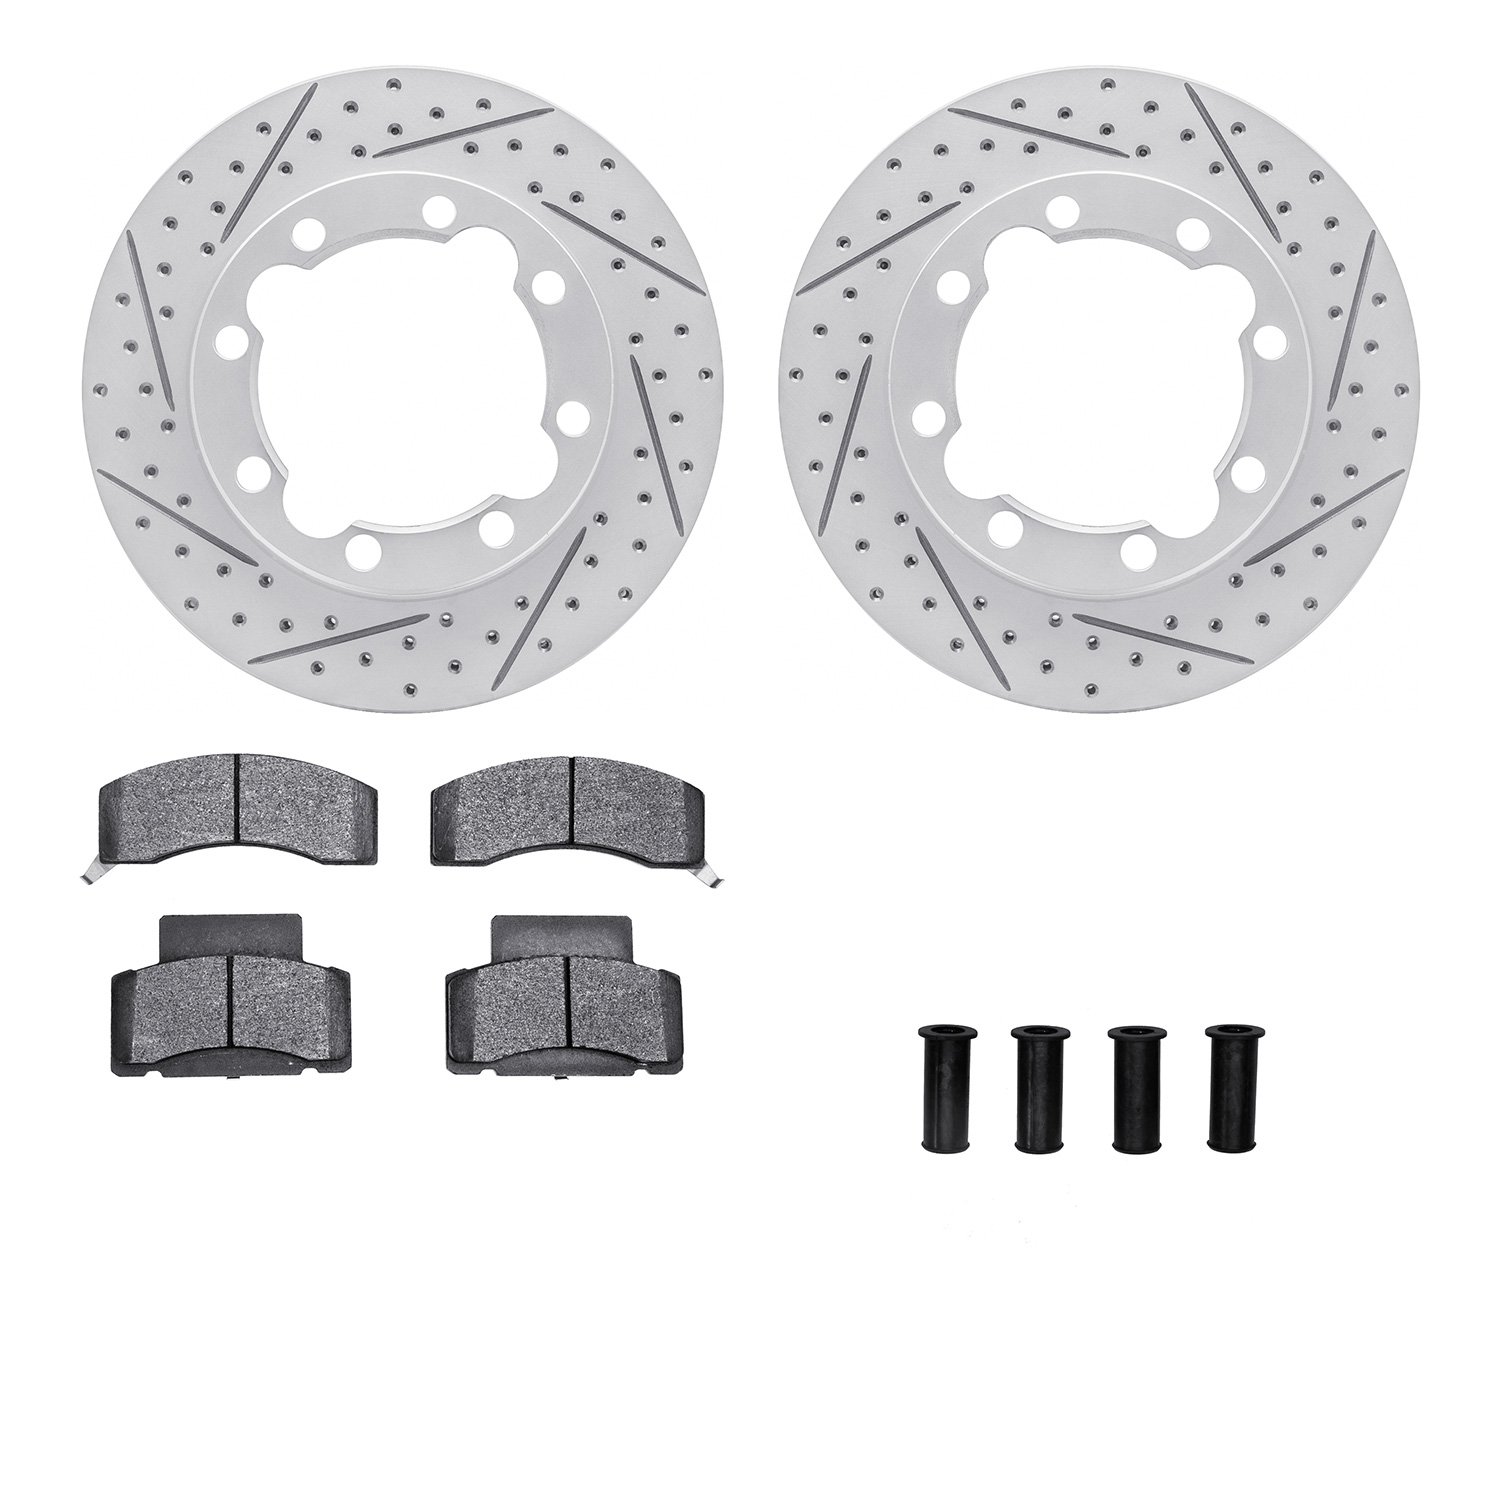 2212-40035 Geoperformance Drilled/Slotted Rotors w/Heavy-Duty Pads Kit & Hardware, 1992-2000 Multiple Makes/Models, Position: Fr